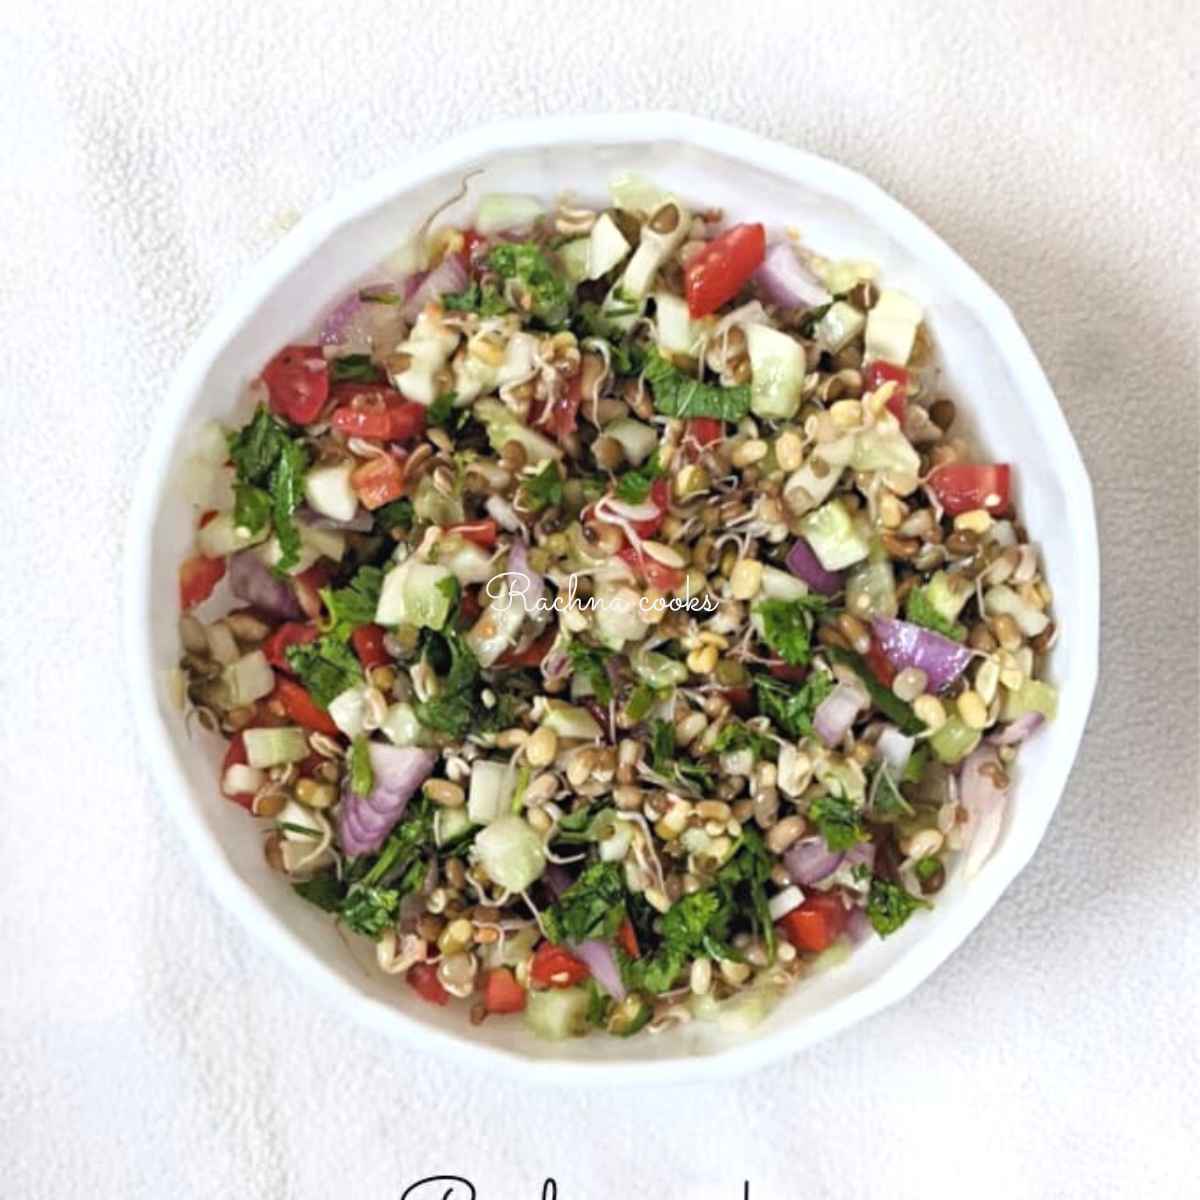 Top shot of a bowl of sprouted lentil salad